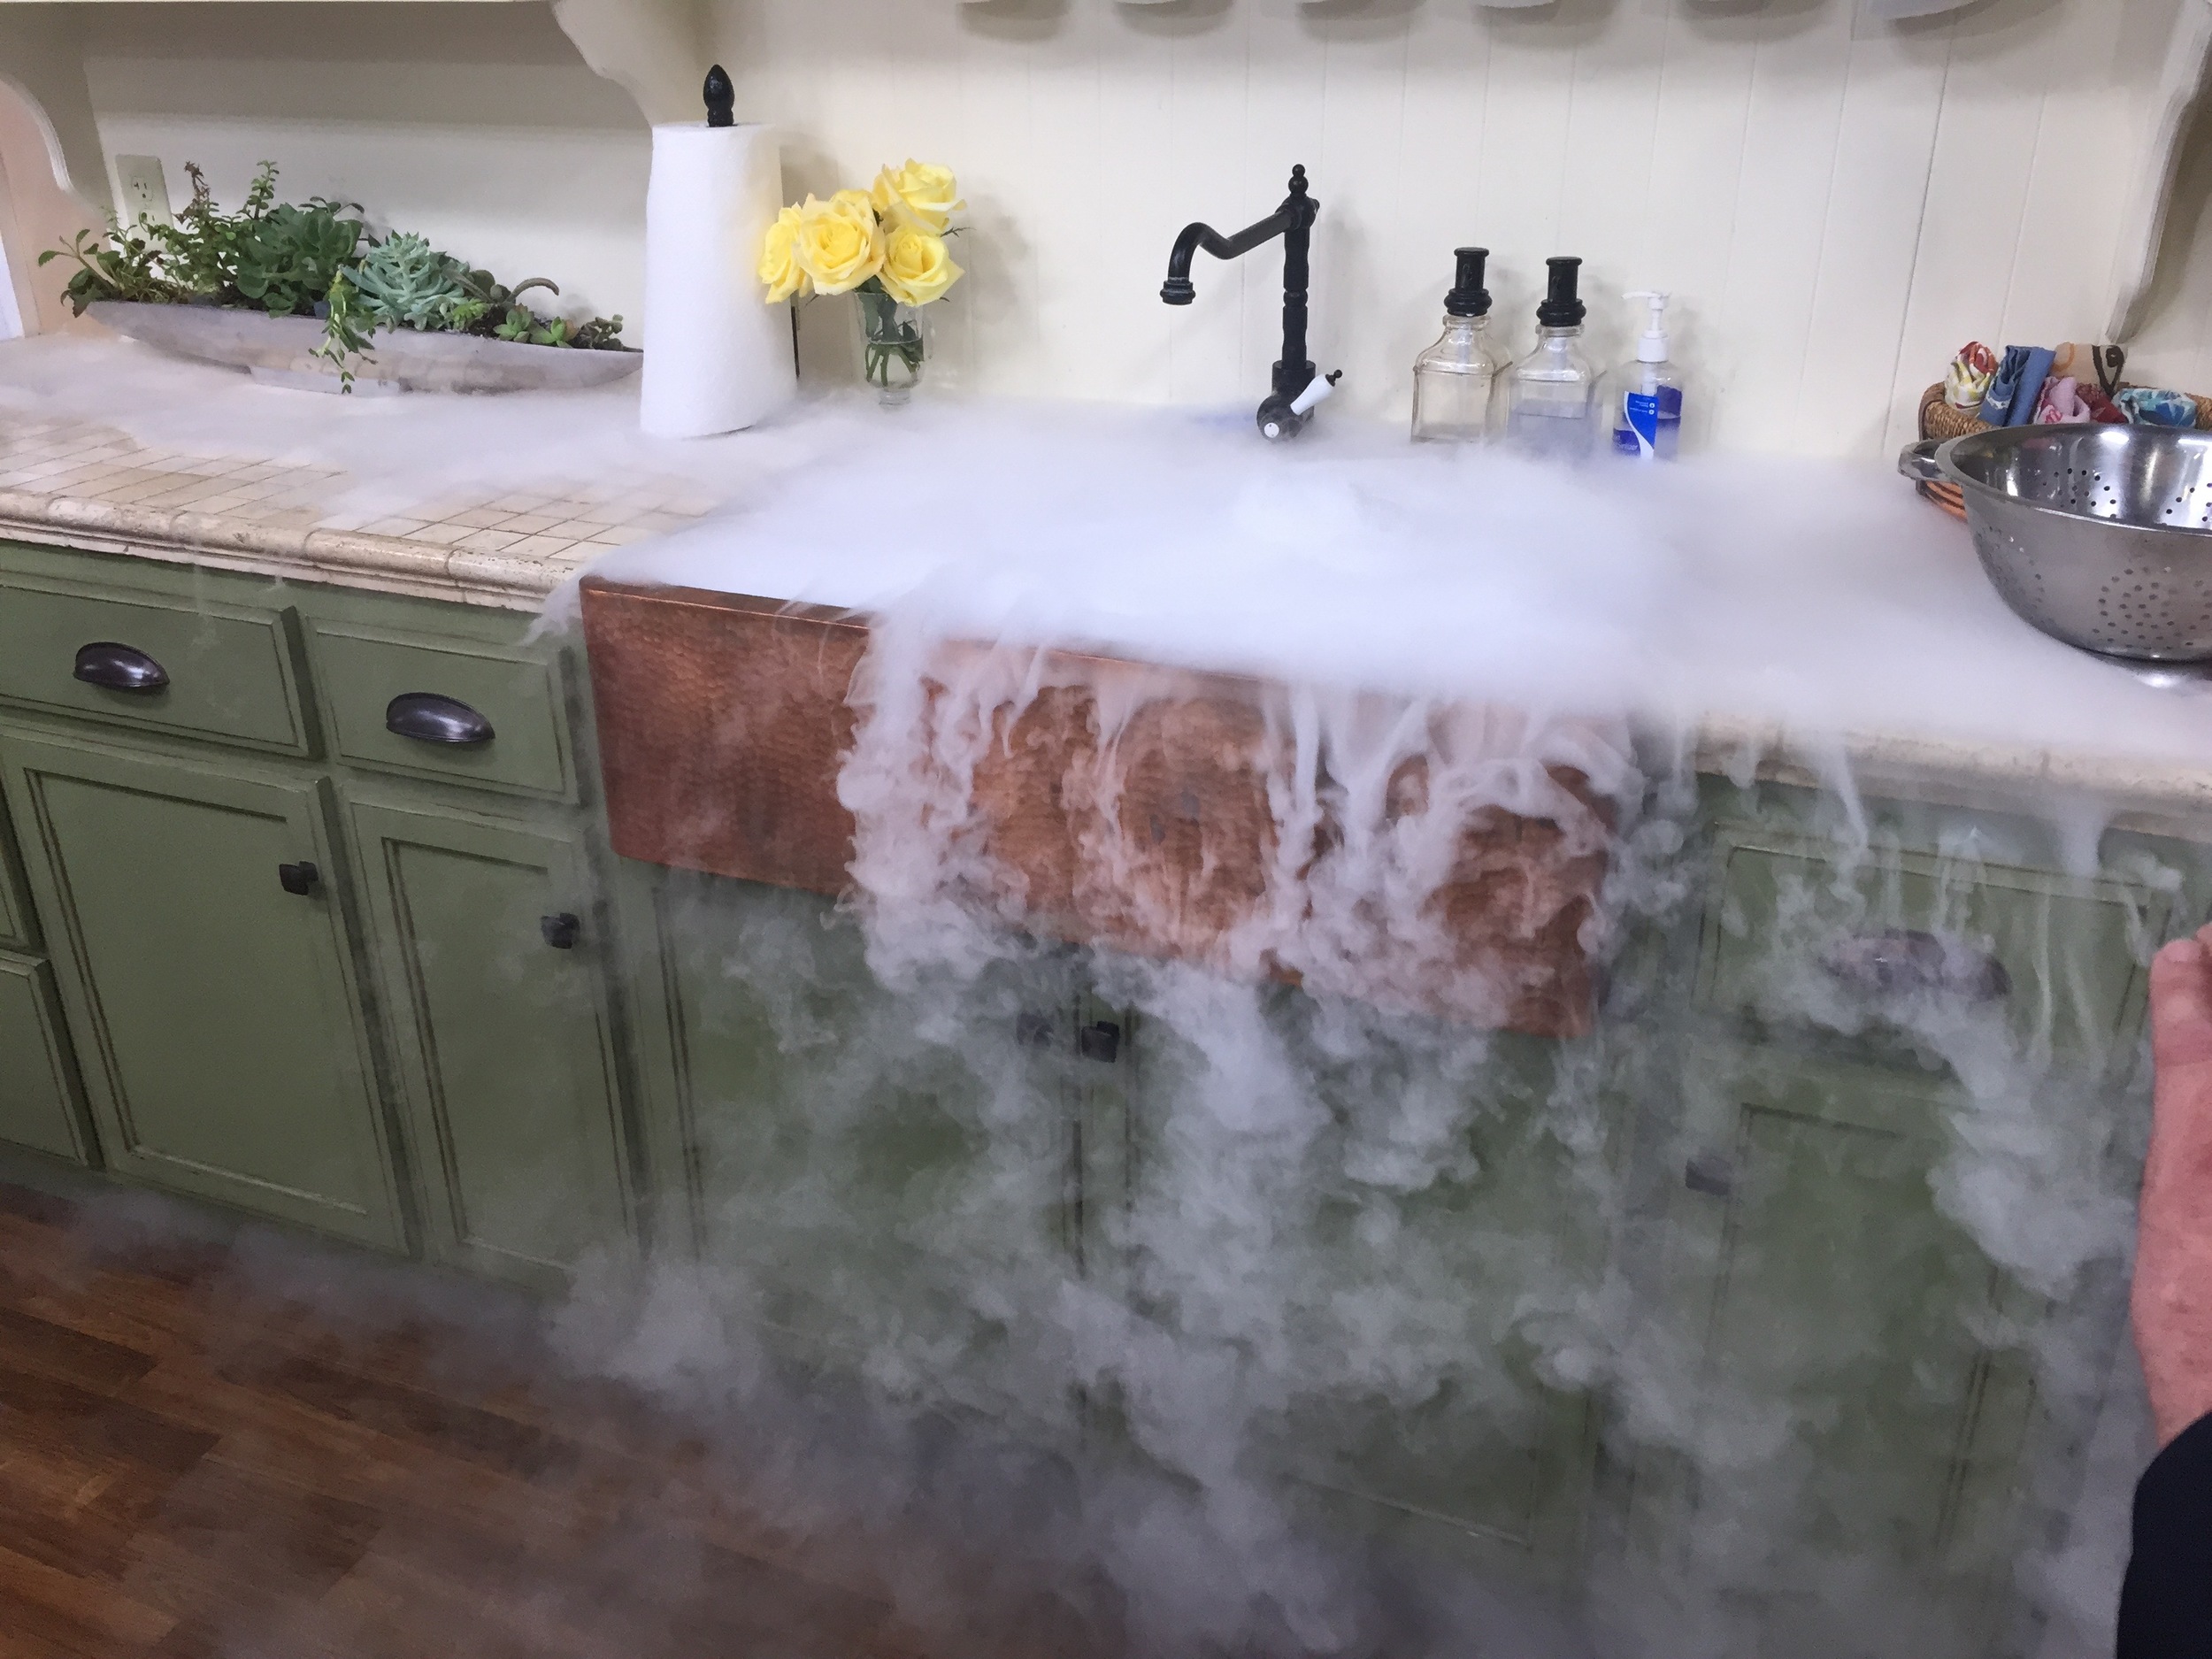 How to Use Dry Ice Safely for Halloween